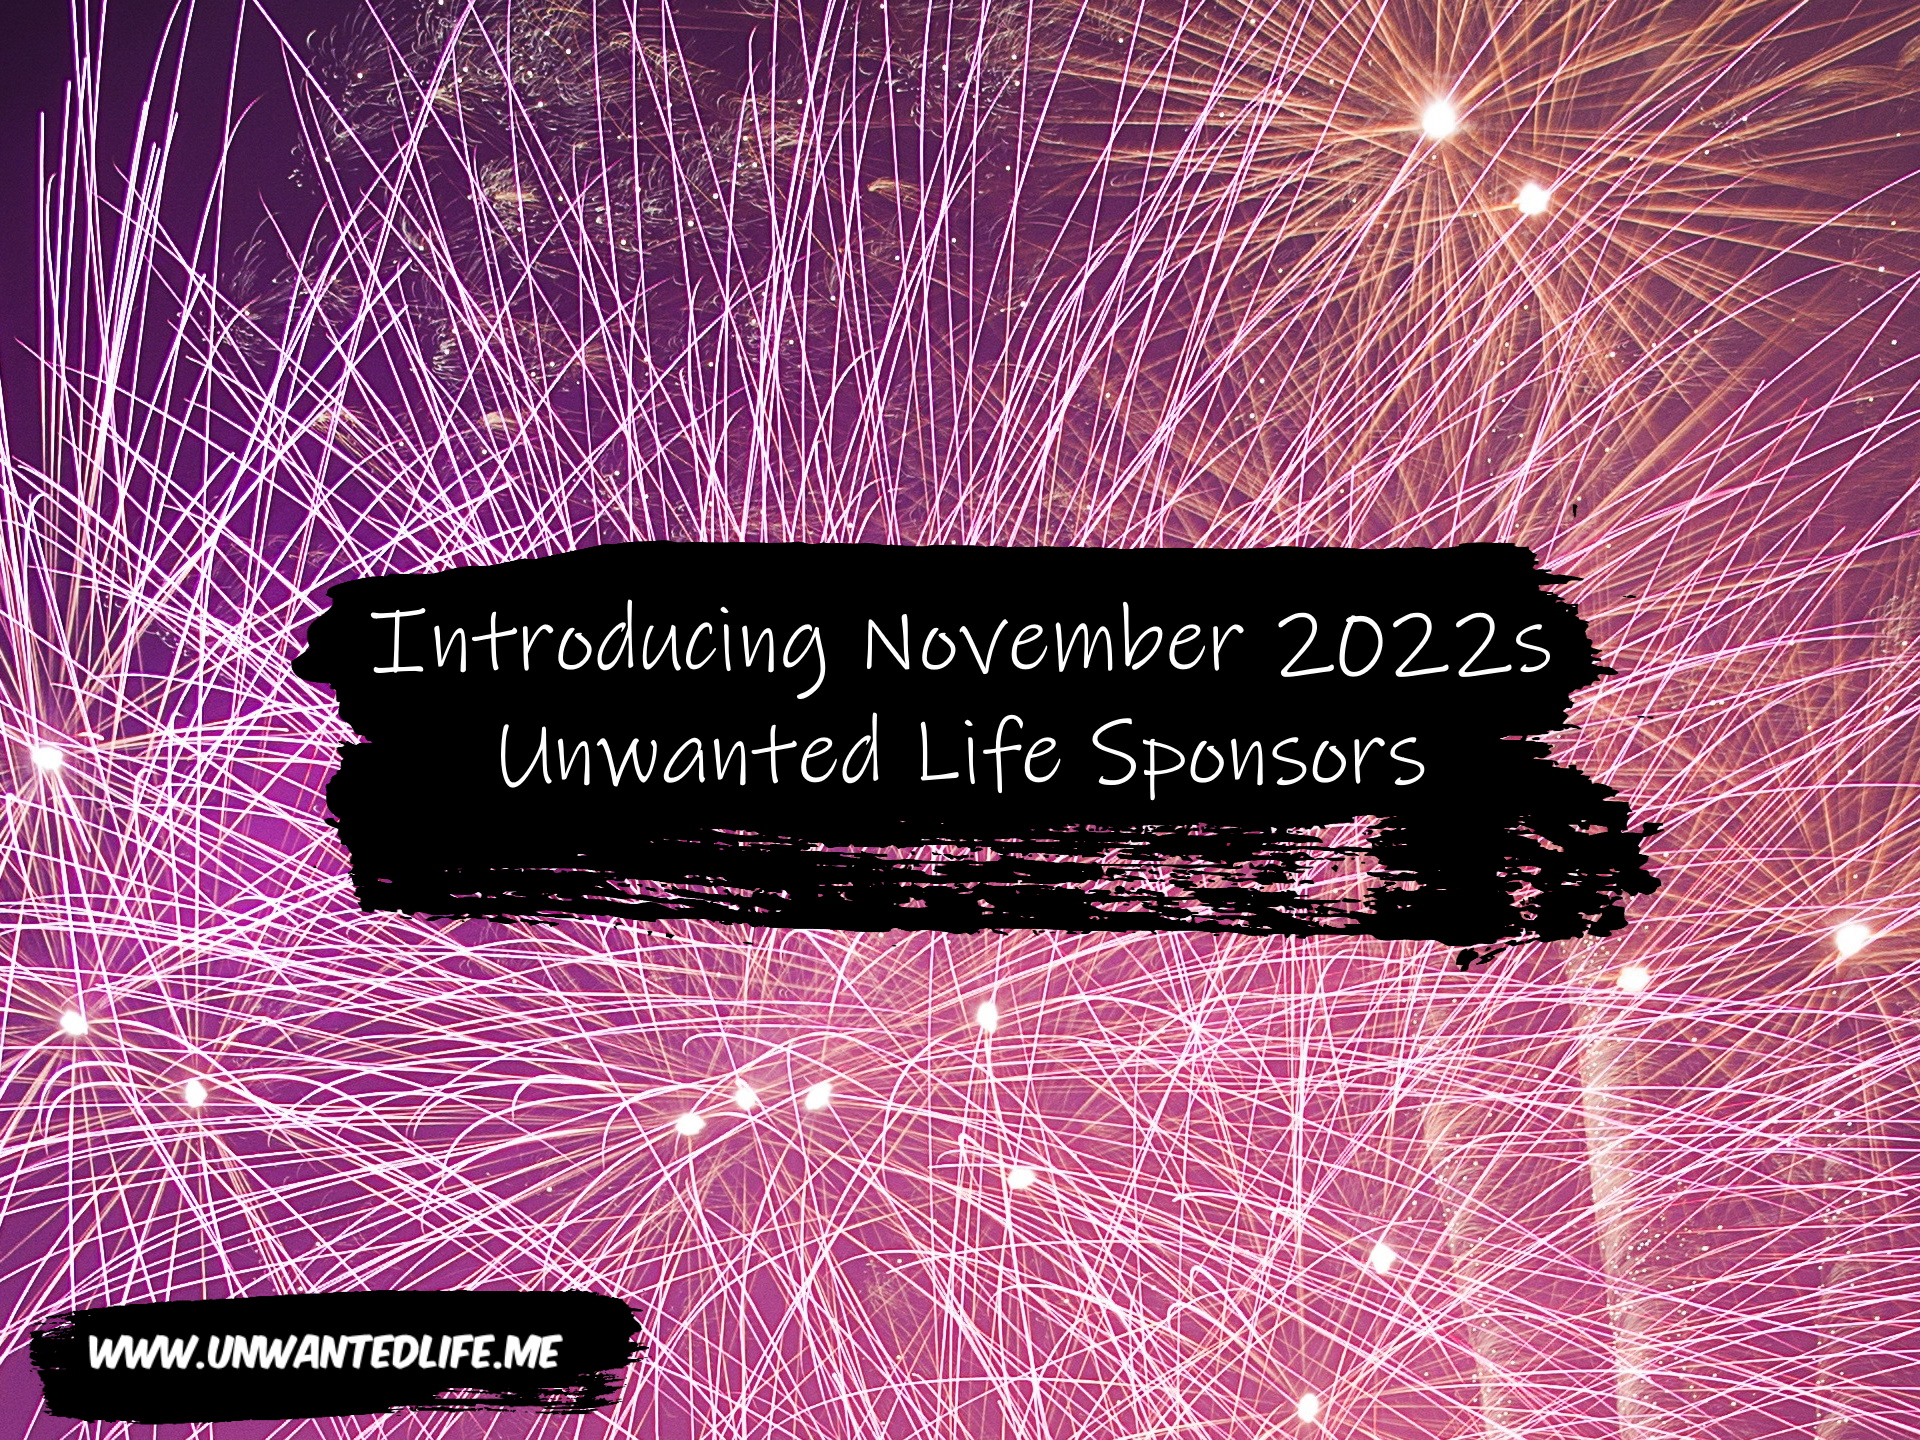 A photo of fireworks with the title of the article across the middle of the image - Introducing November 2022s Unwanted Life Sponsors